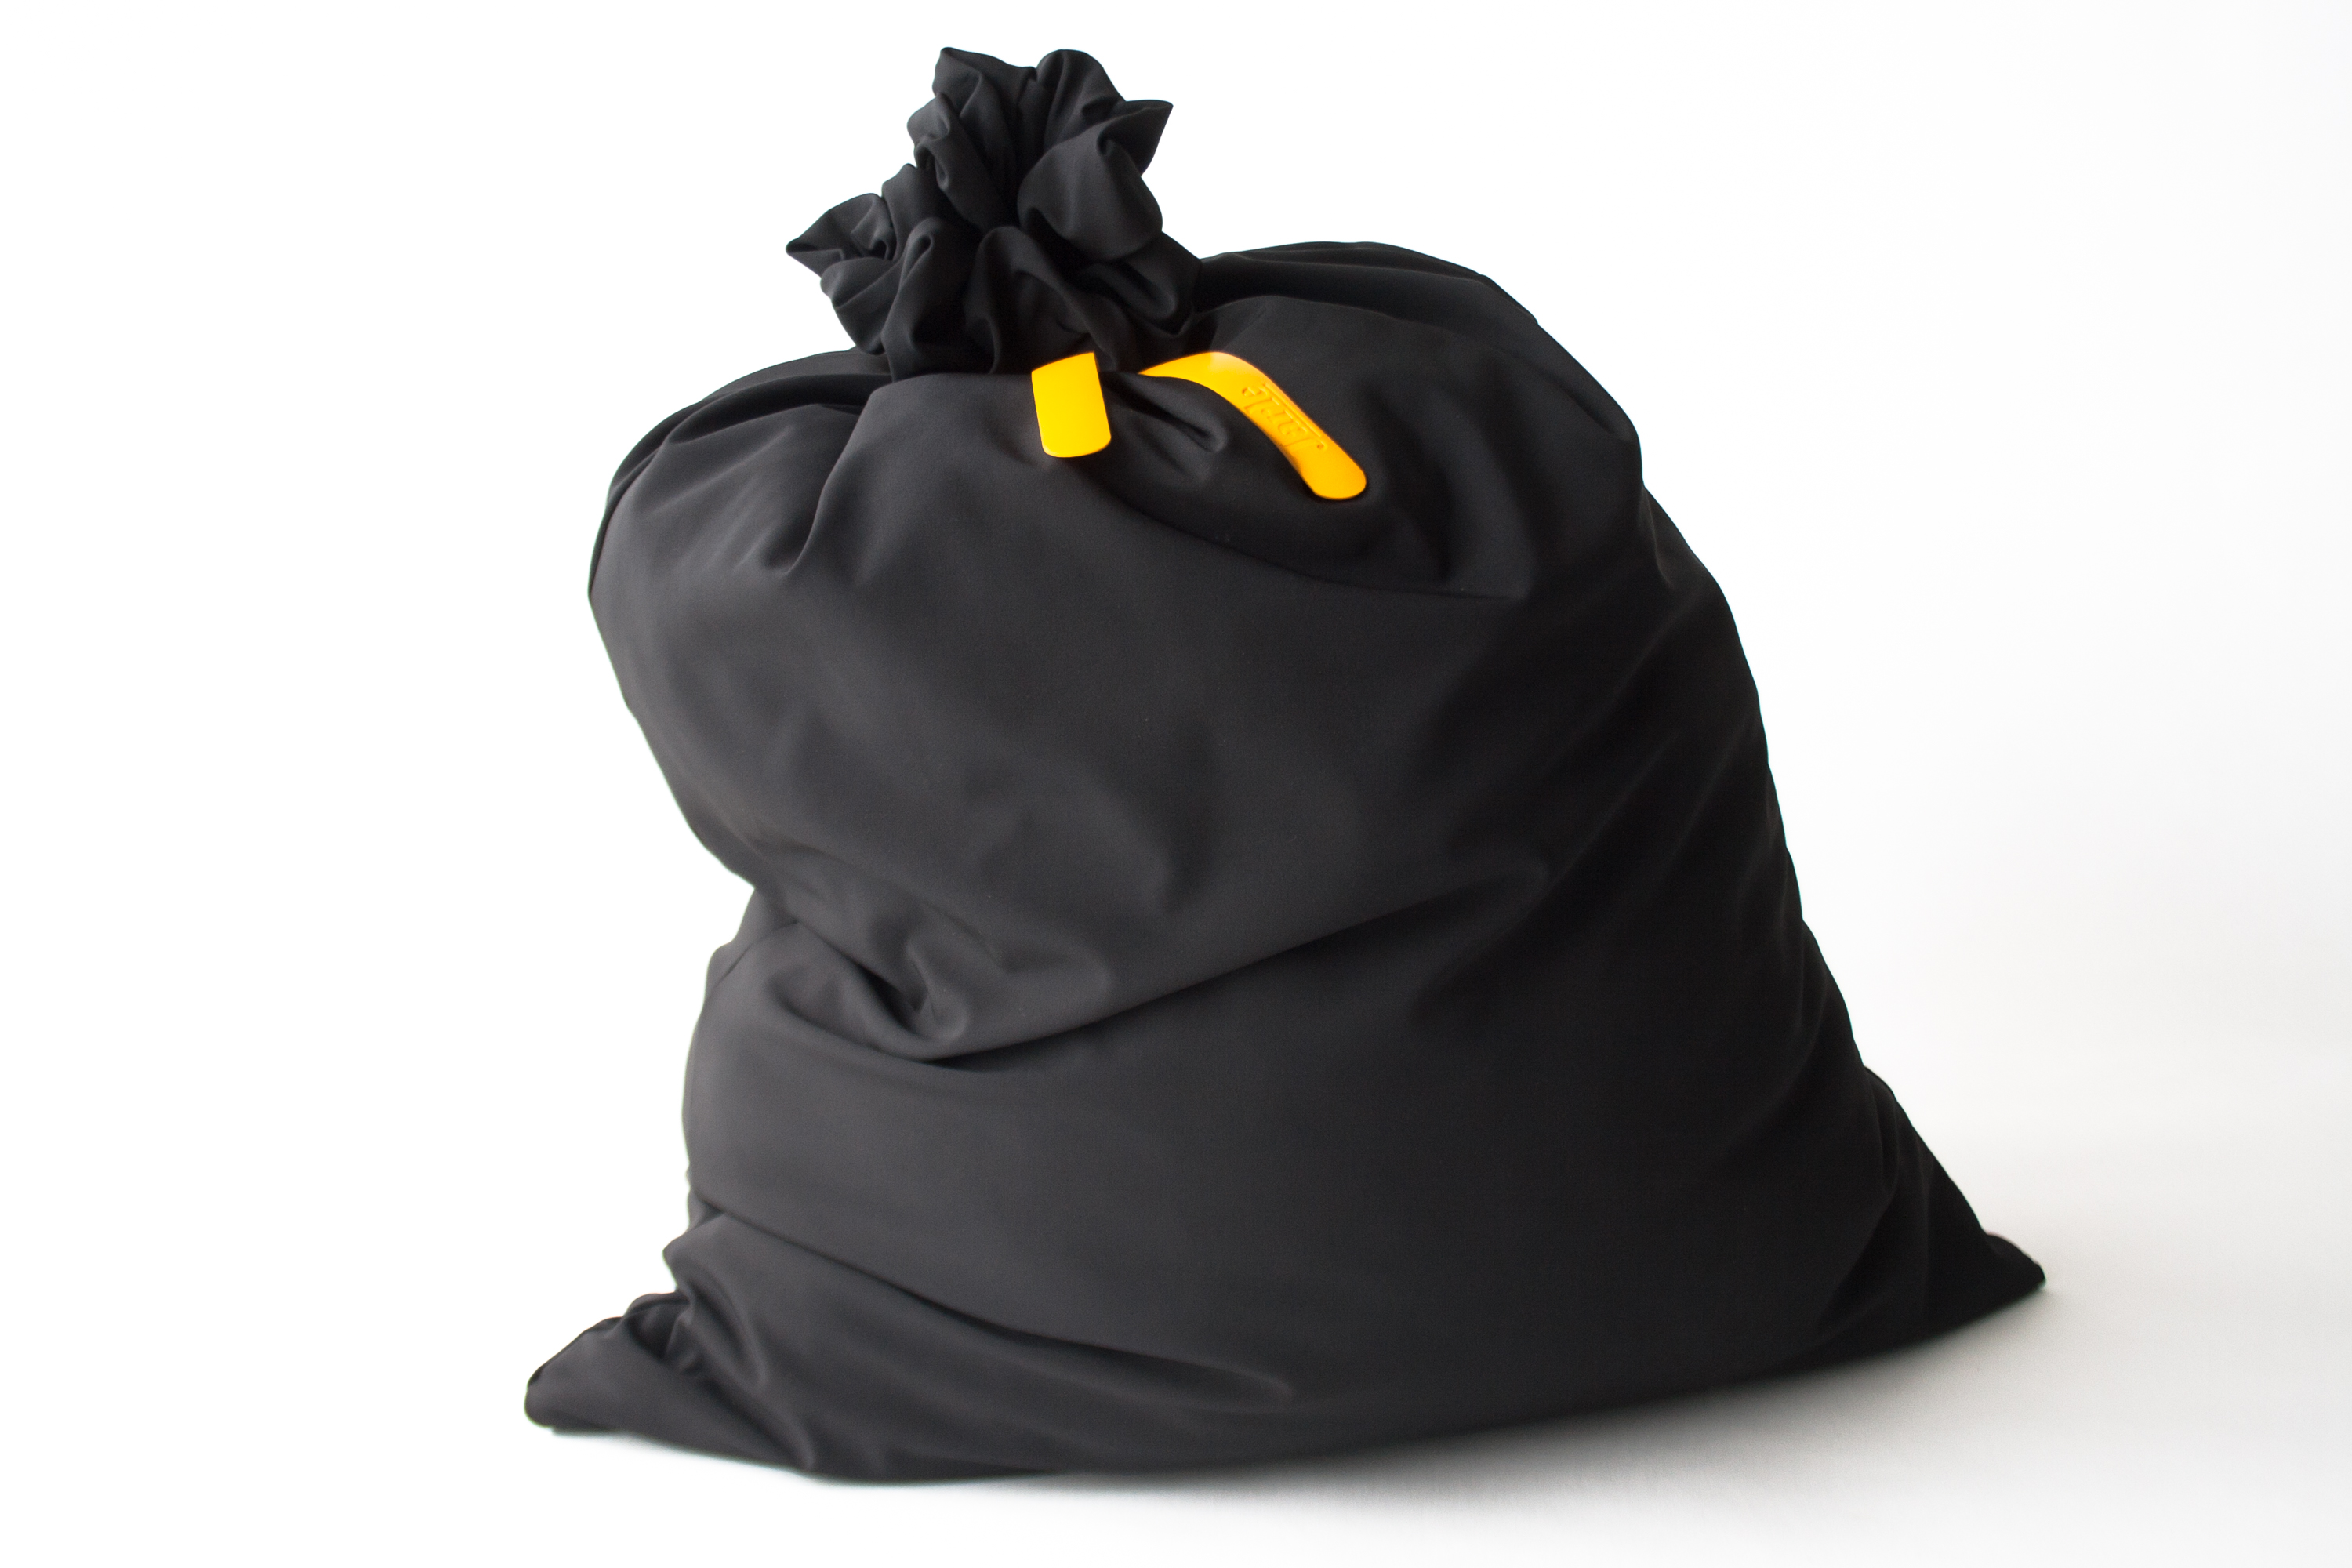 Garbage Pillow, a pillow that looks like a garbage bag. Comfortable trash. Designed by Jarle Veldman